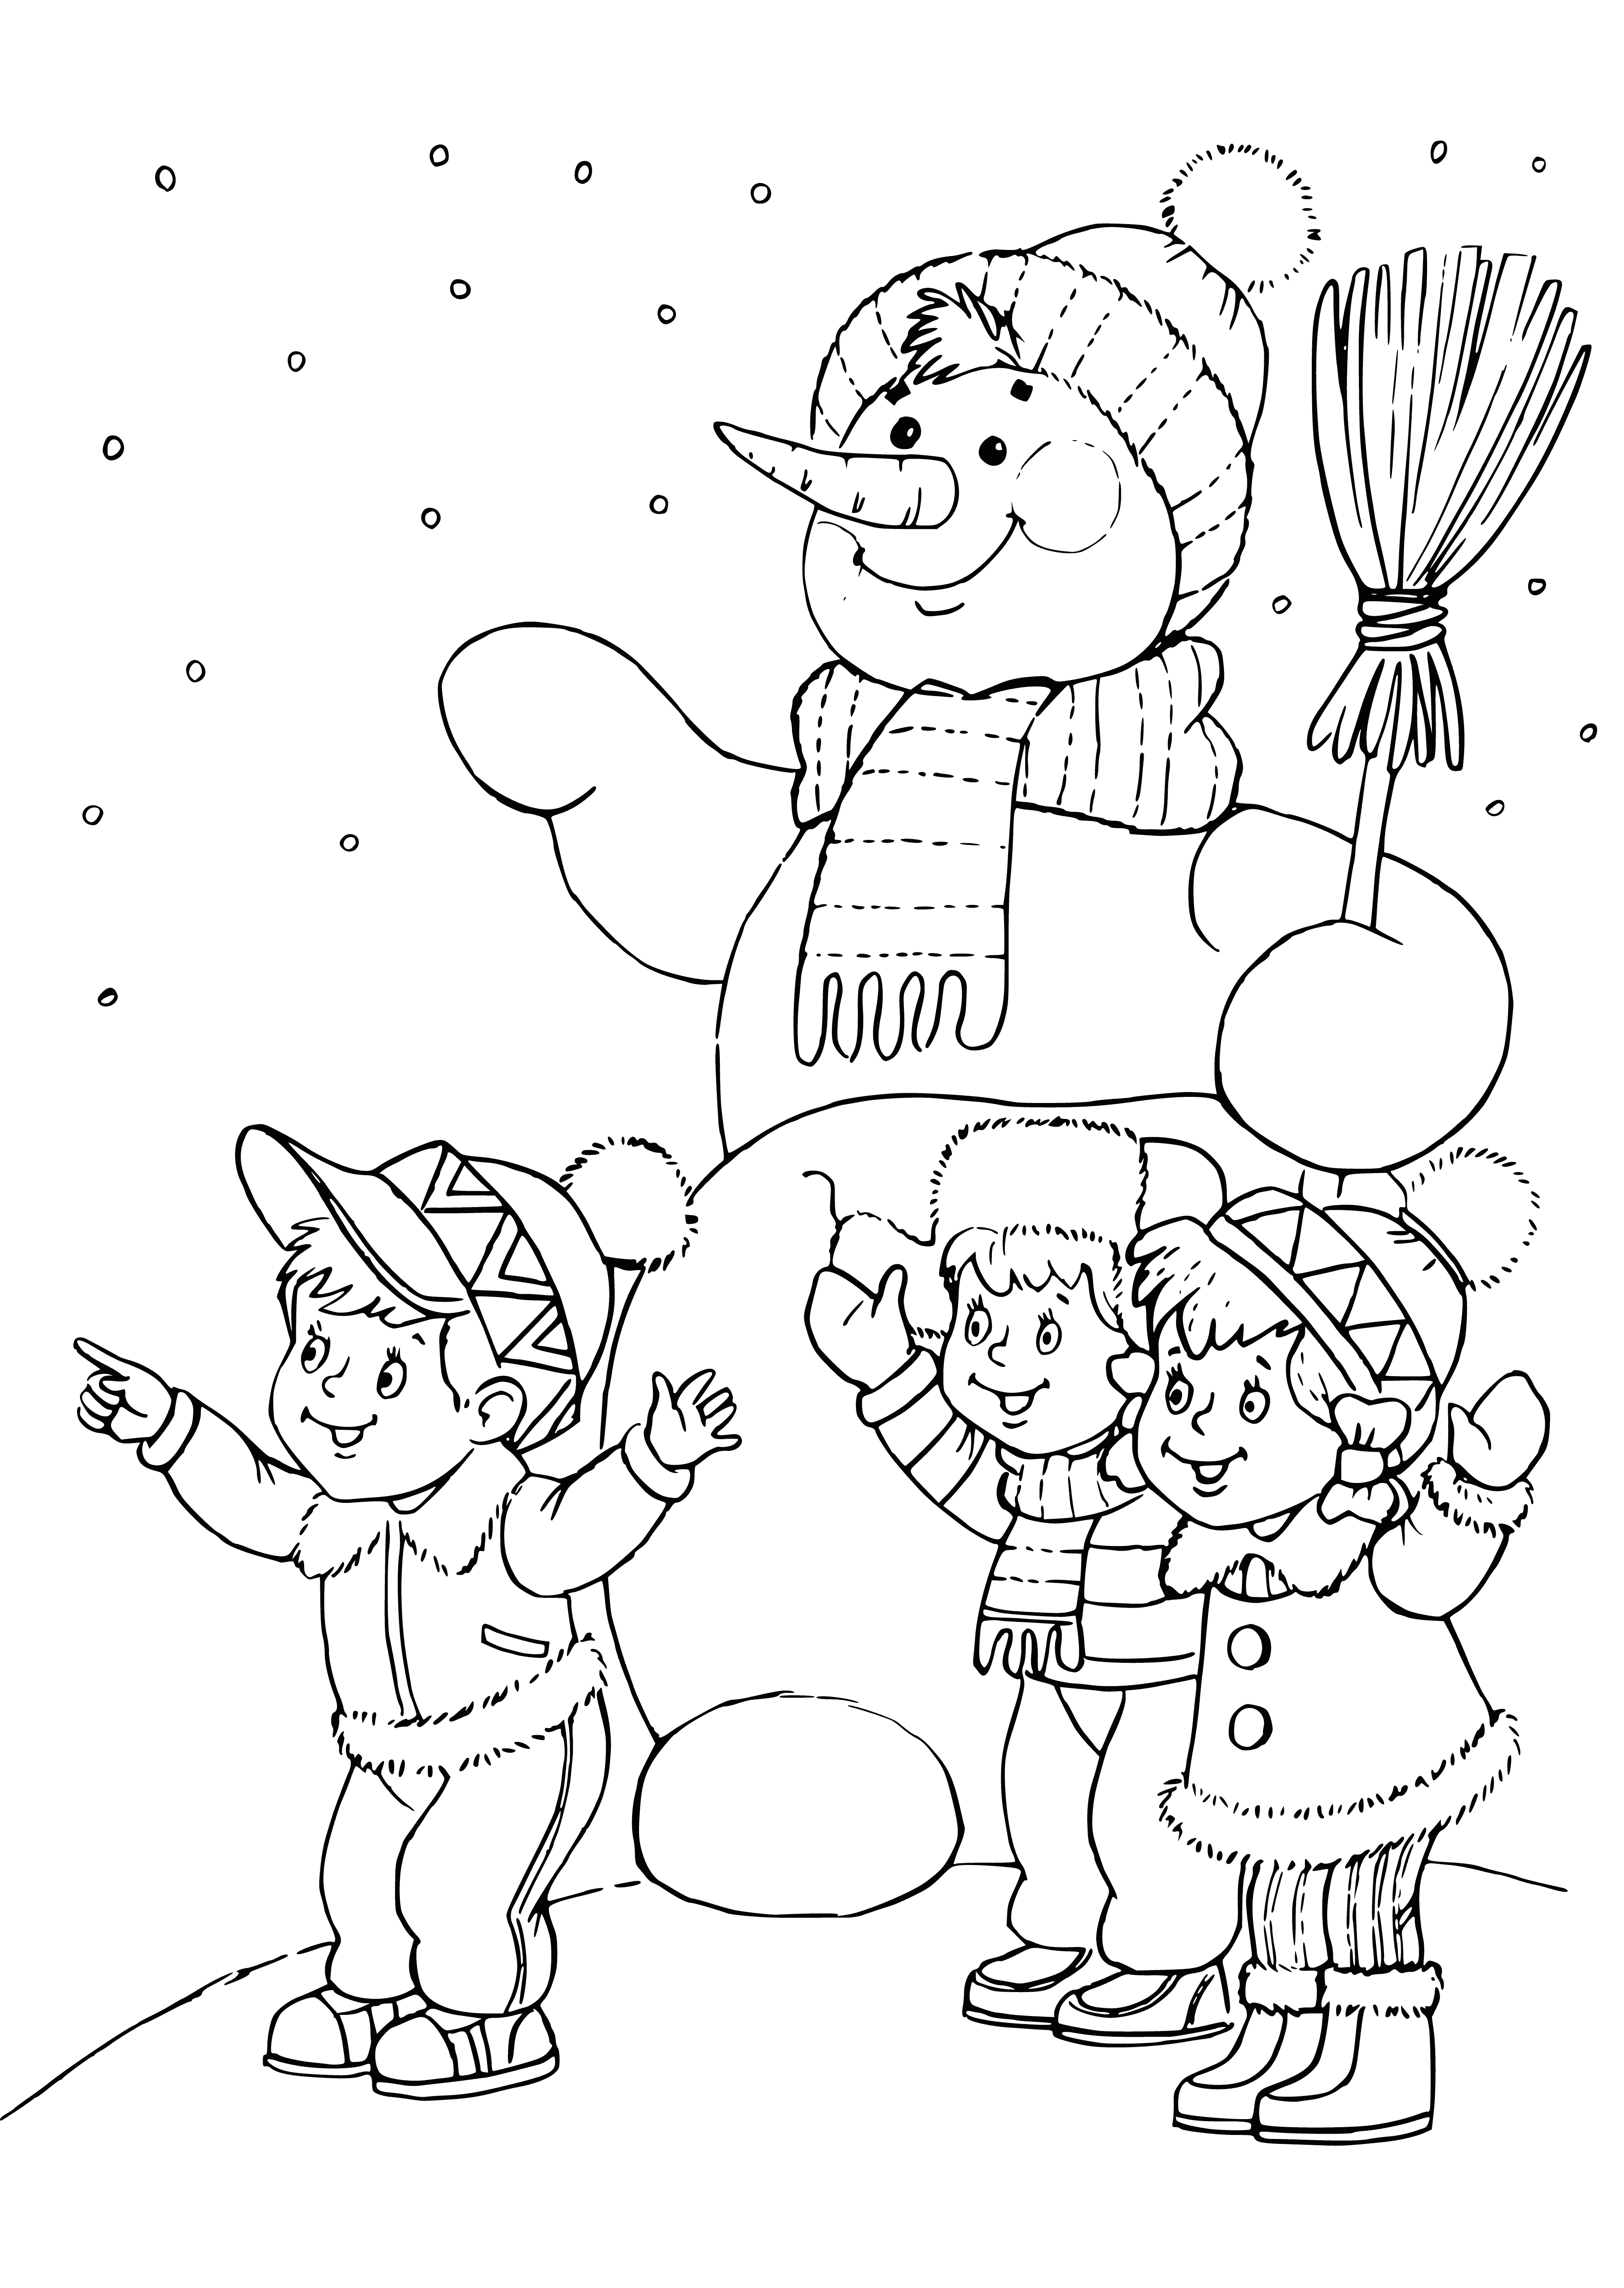 coloring page: 3 snowmen: 2 kids in hats & scarves & 1 adult wearing a top hat in a snow-filled field.